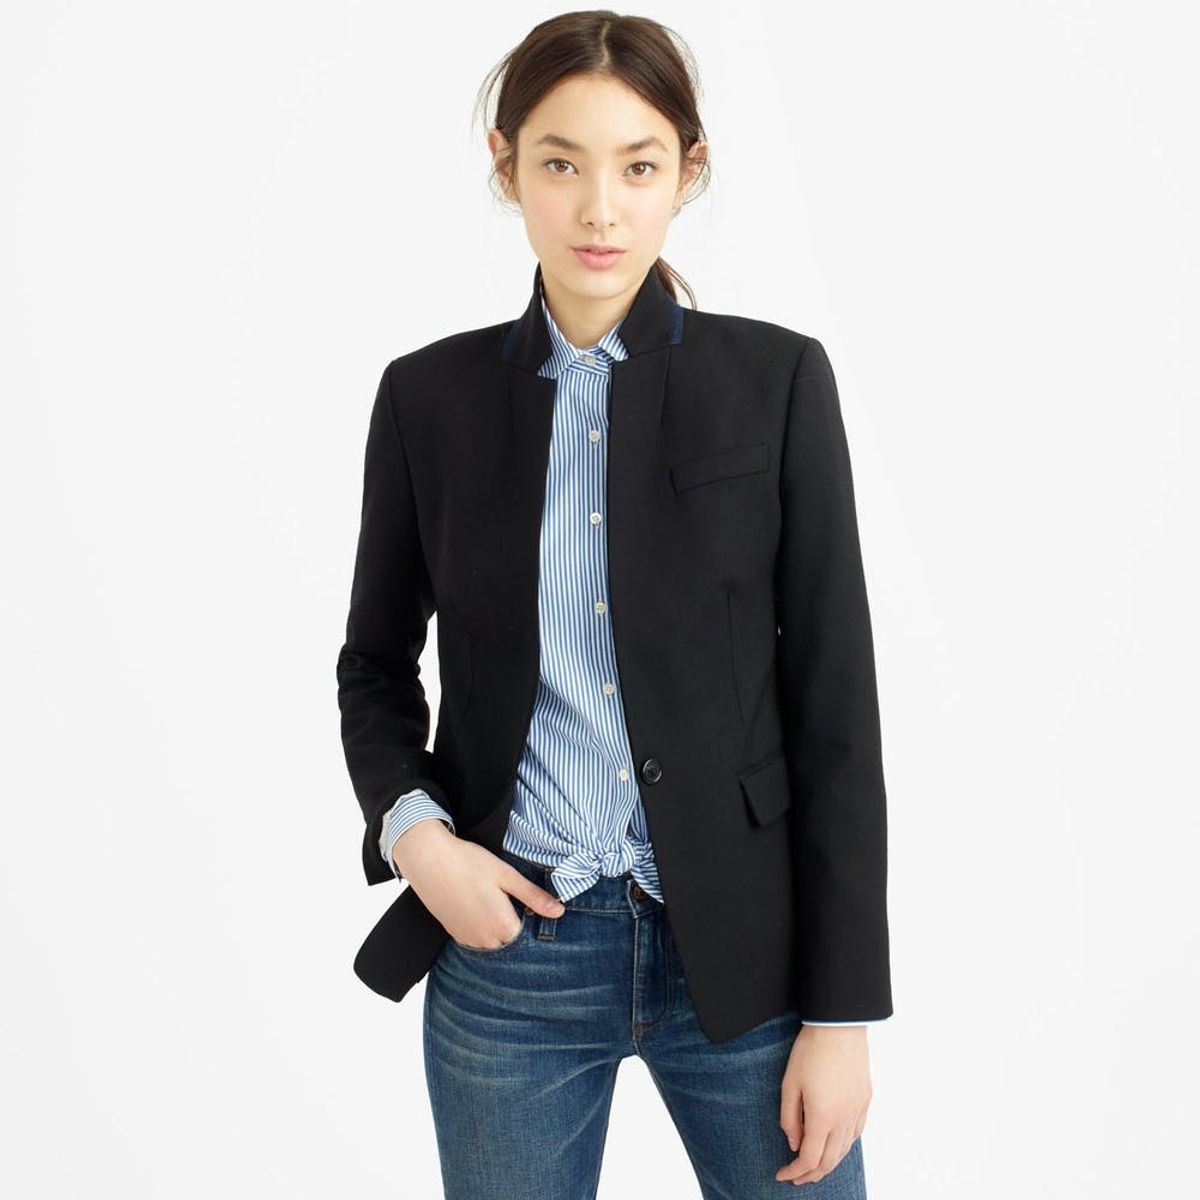 These Are the 5 Pieces of Clothing Every 20-Something Should Get Tailored